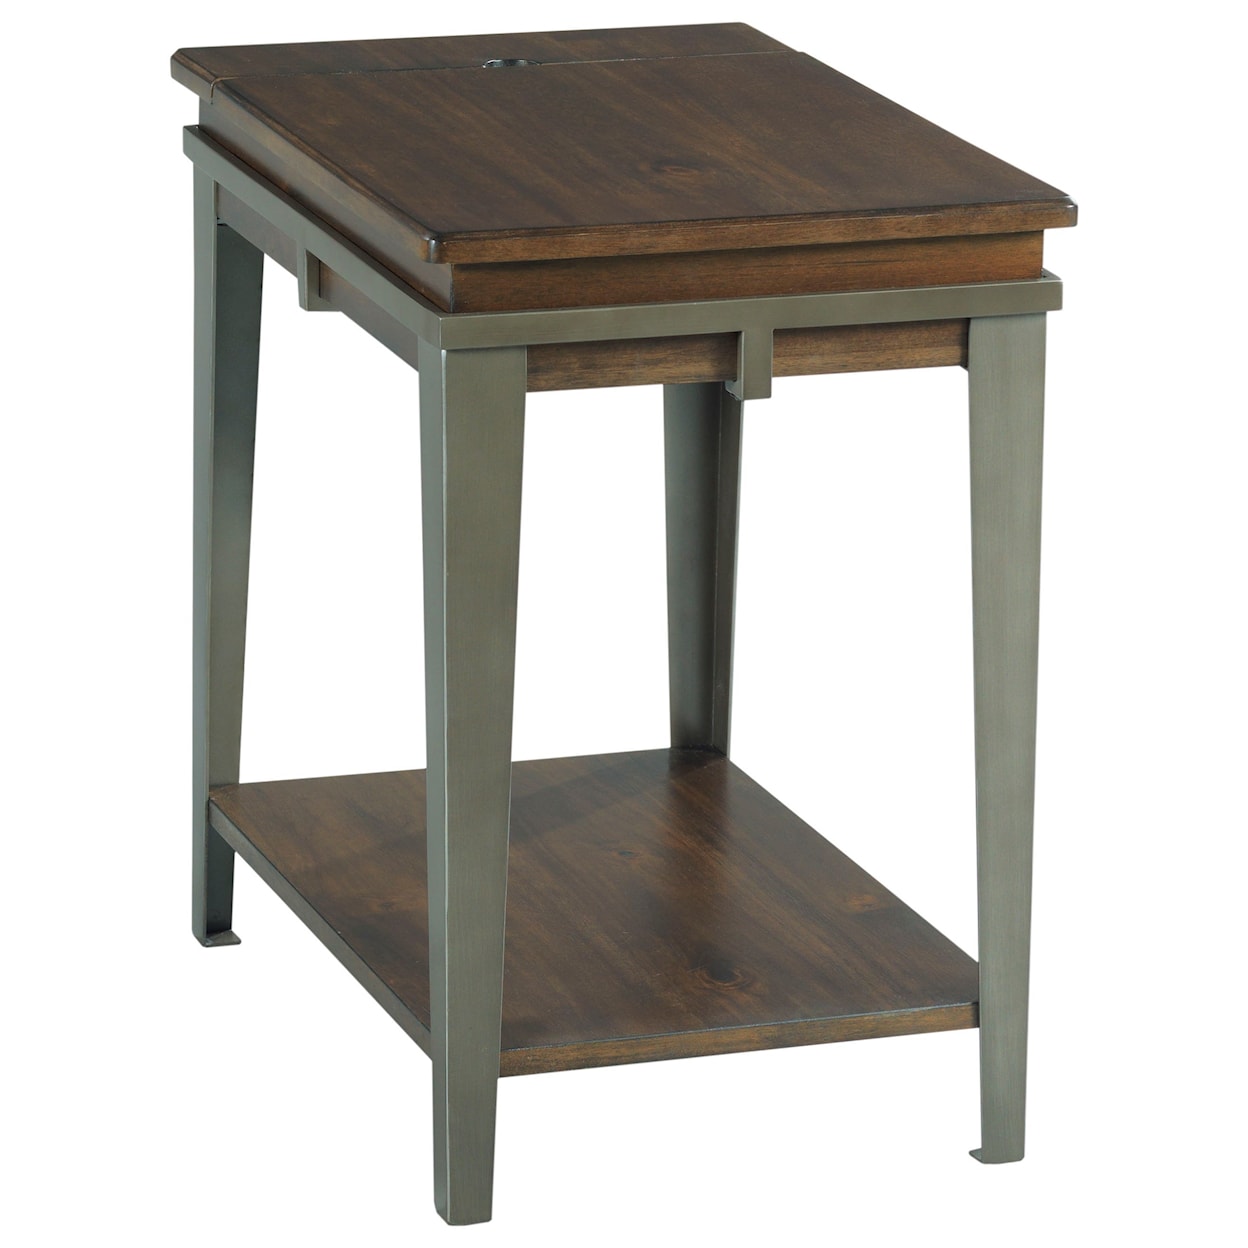 Hammary Composite Chairside Table